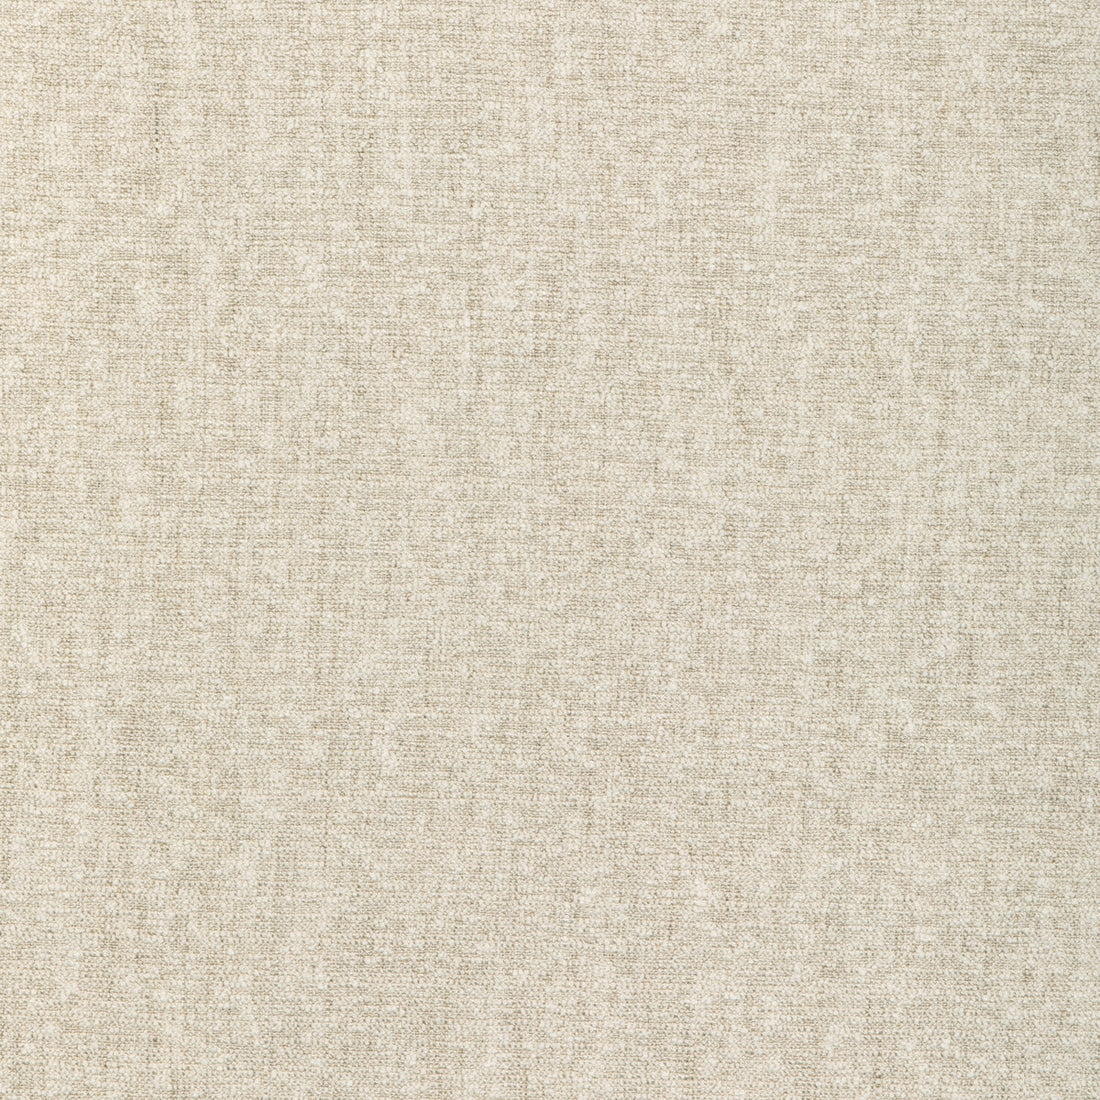 Heritage Weave fabric in linen color - pattern 36900.116.0 - by Kravet Couture in the Atelier Weaves collection